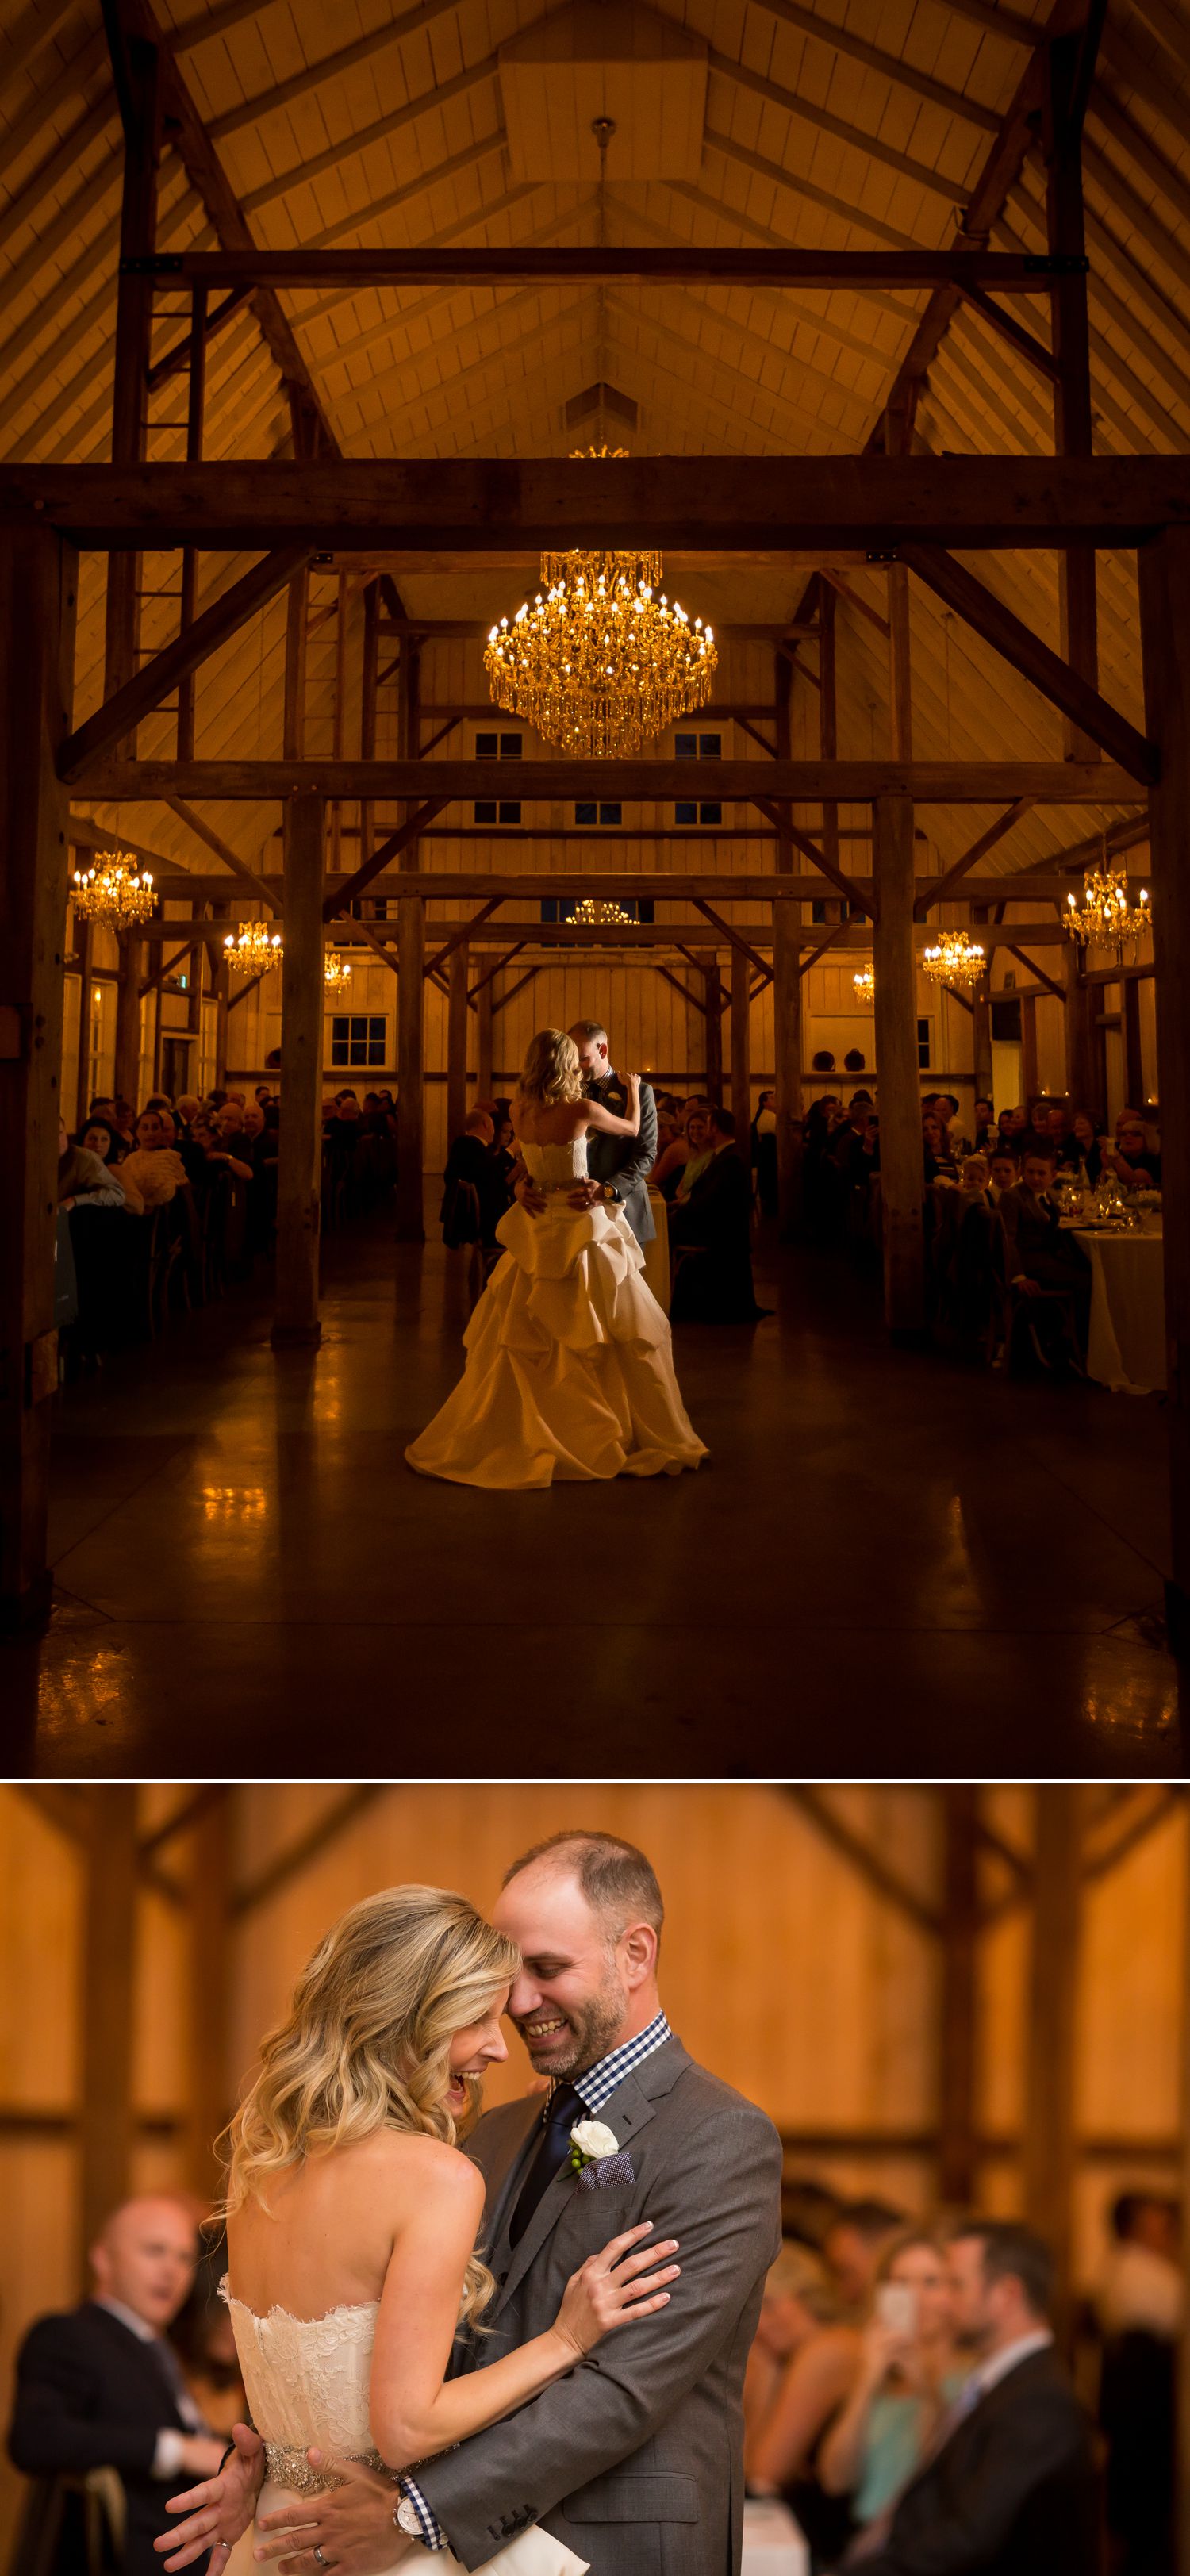 The bride and groom during their first dance at Stonefields